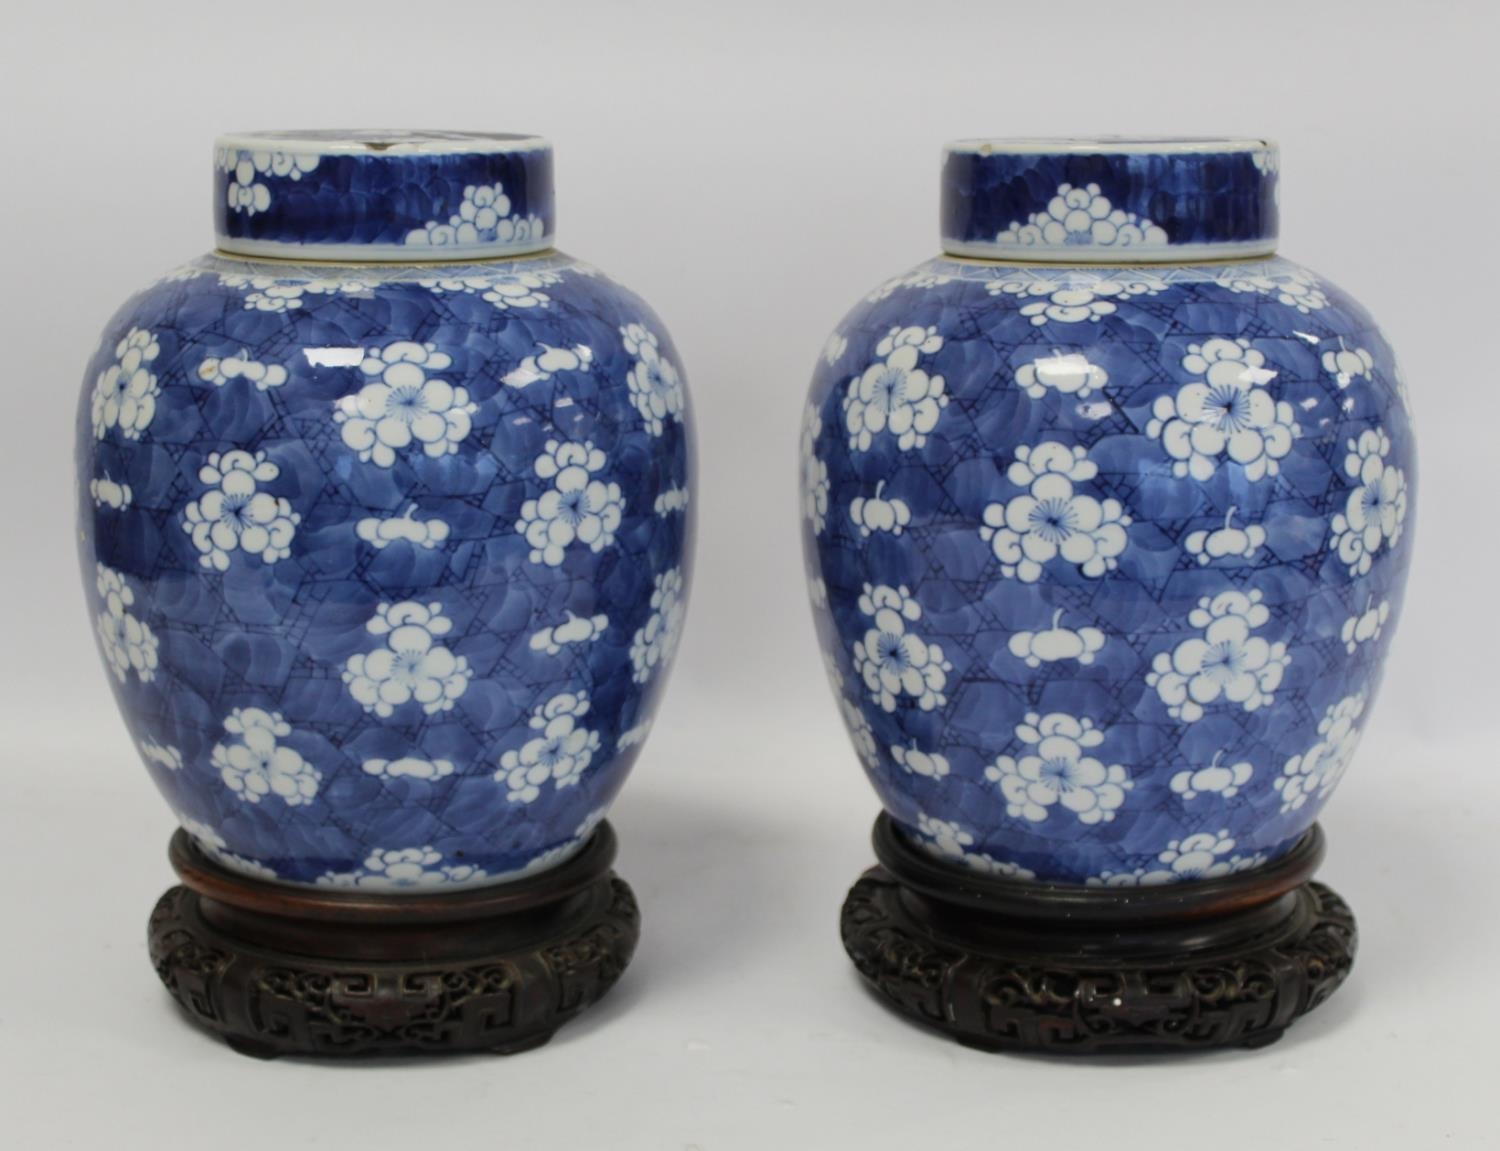 Pair of 19th century Chinese porcelain covered ginger jars of ovoid form with underglaze blue